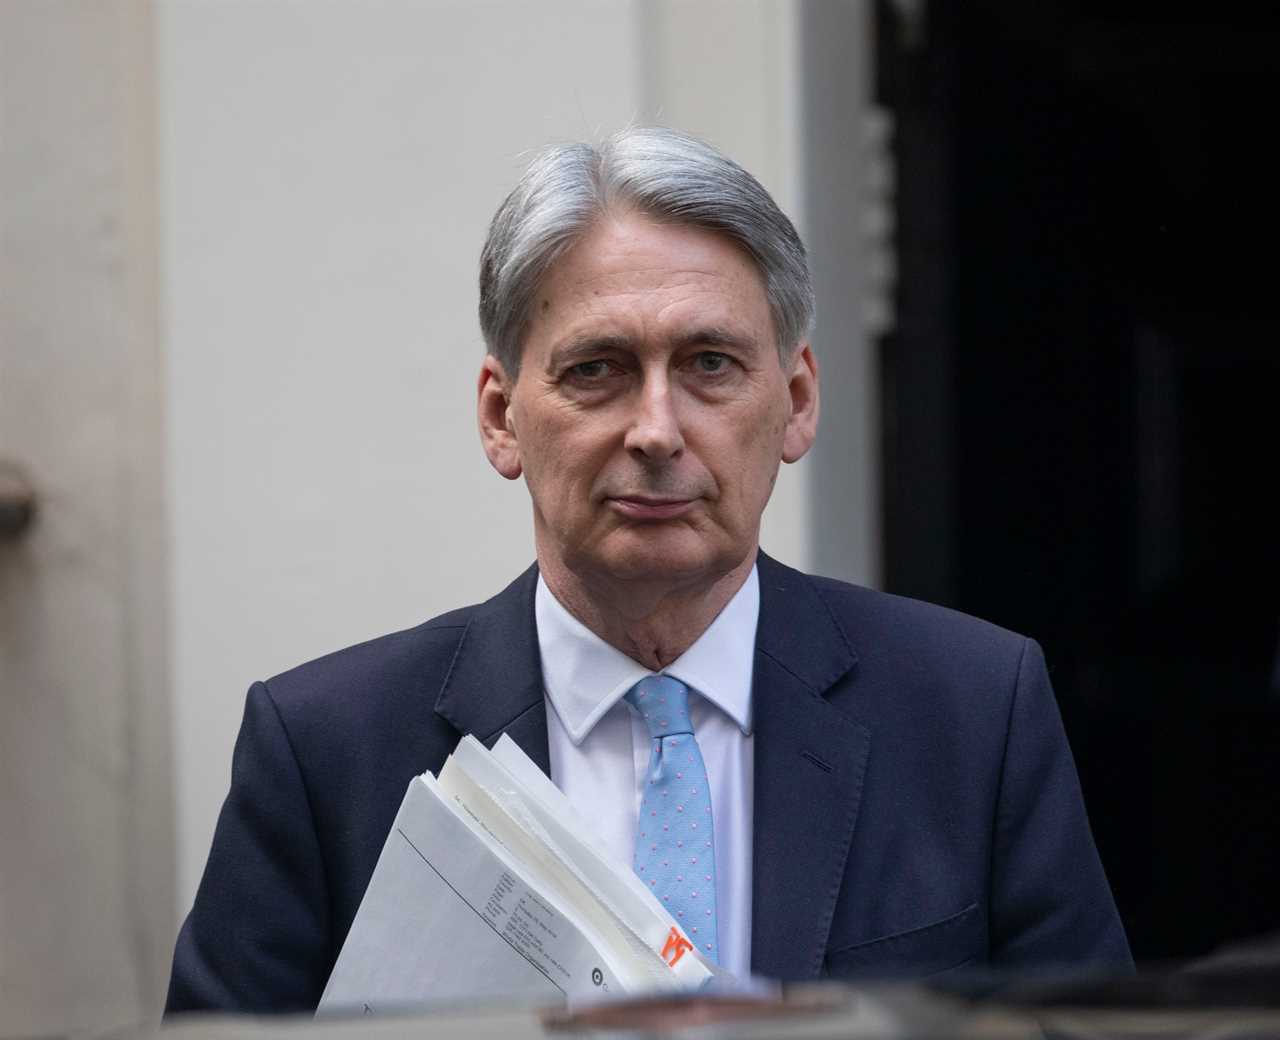 Brits were misled about cost of May and Hammond’s net zero carbon target